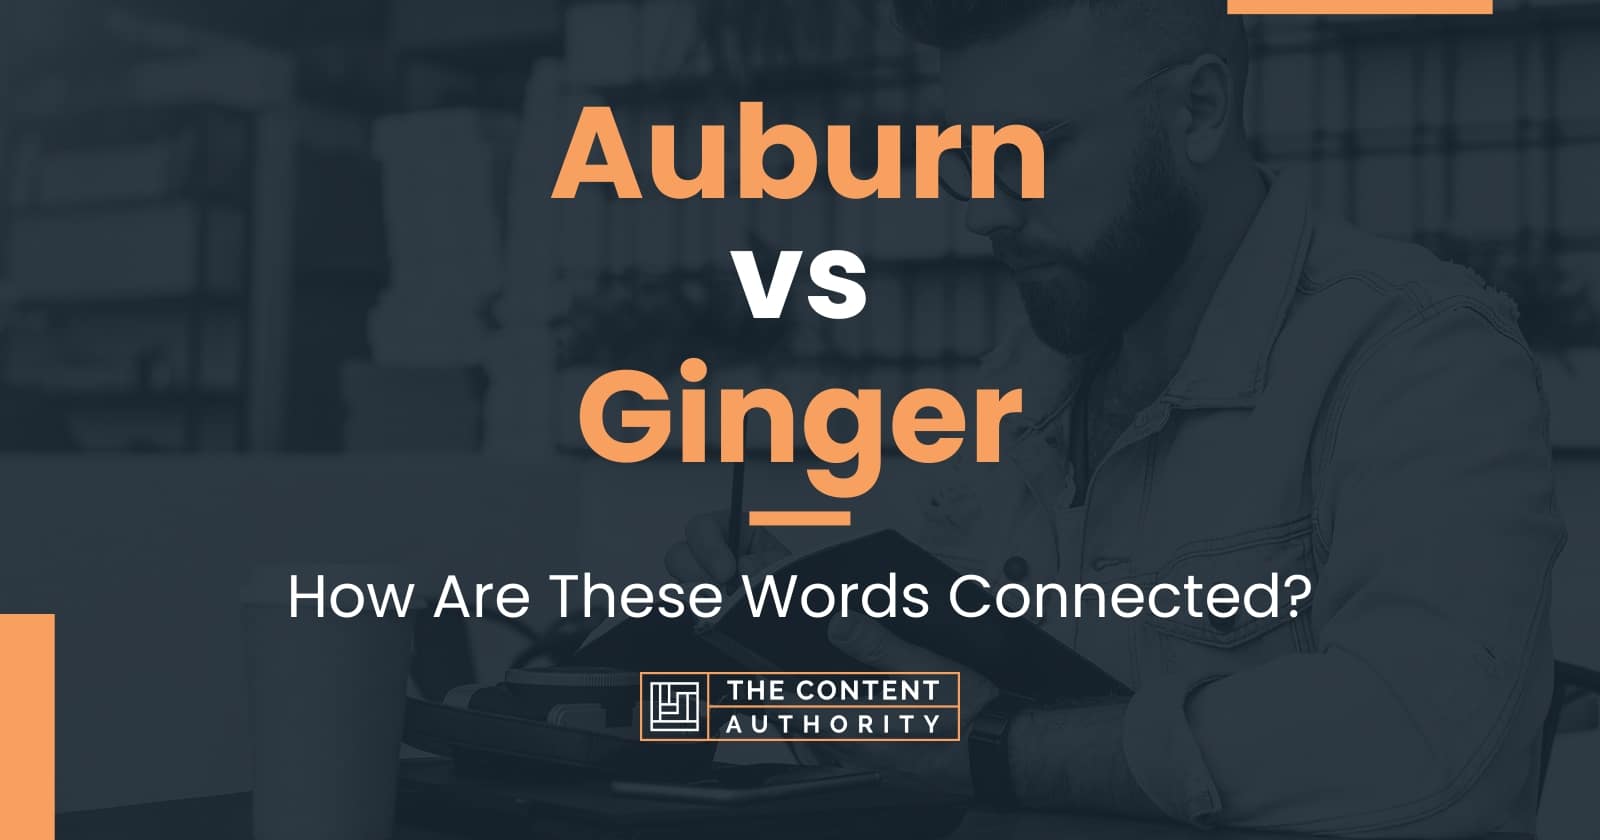 auburn-vs-ginger-how-are-these-words-connected